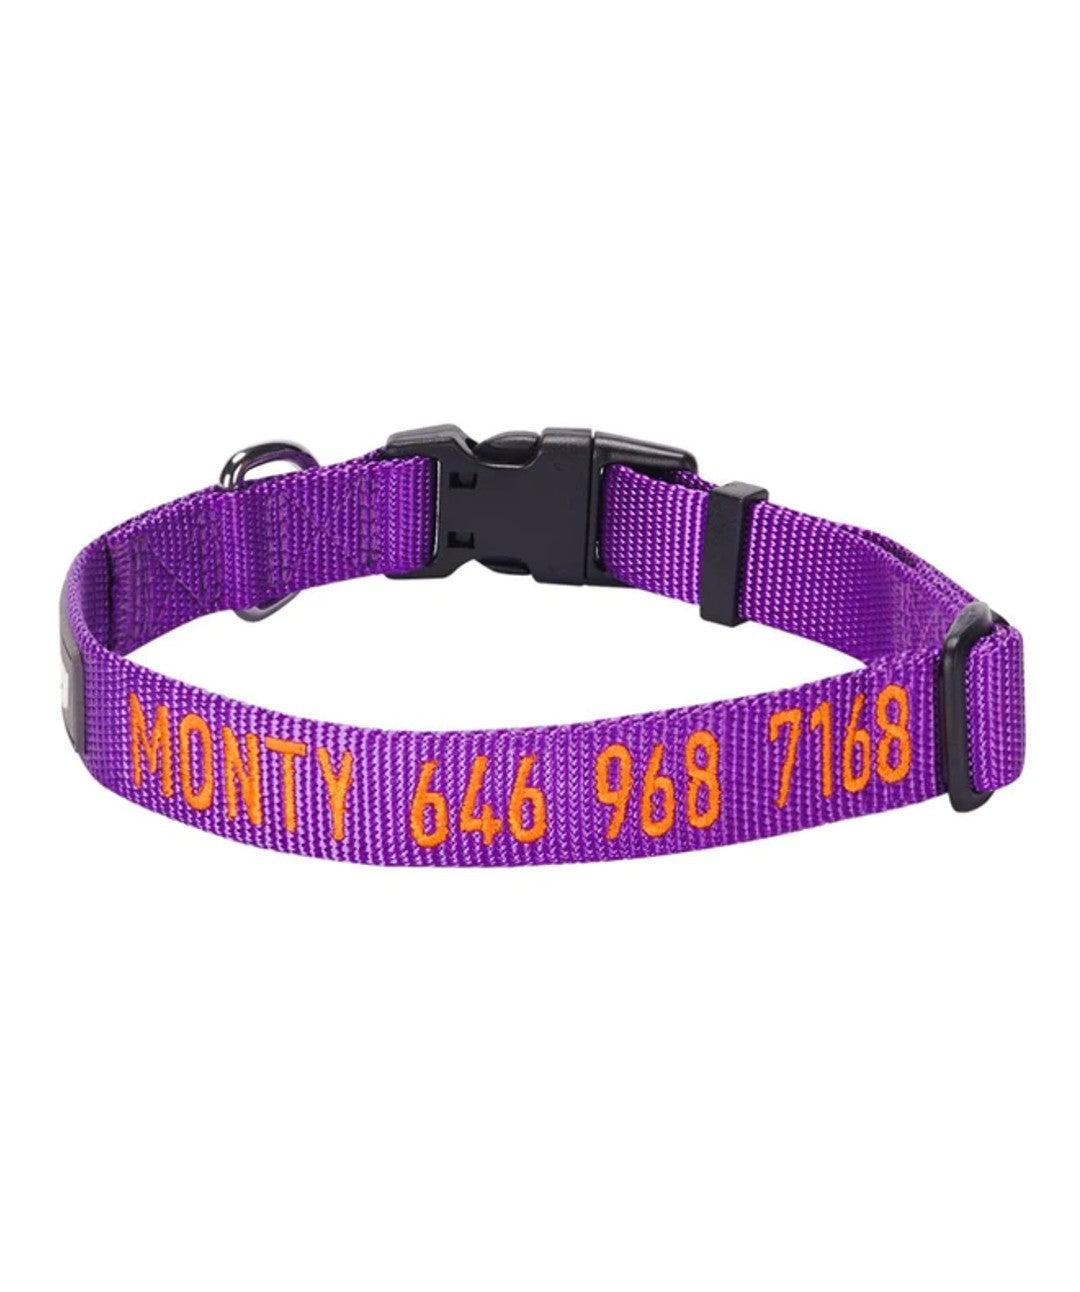 Blueberry Pet Personalized Classic Dog Collar Collar Blueberry Pet Purple S 